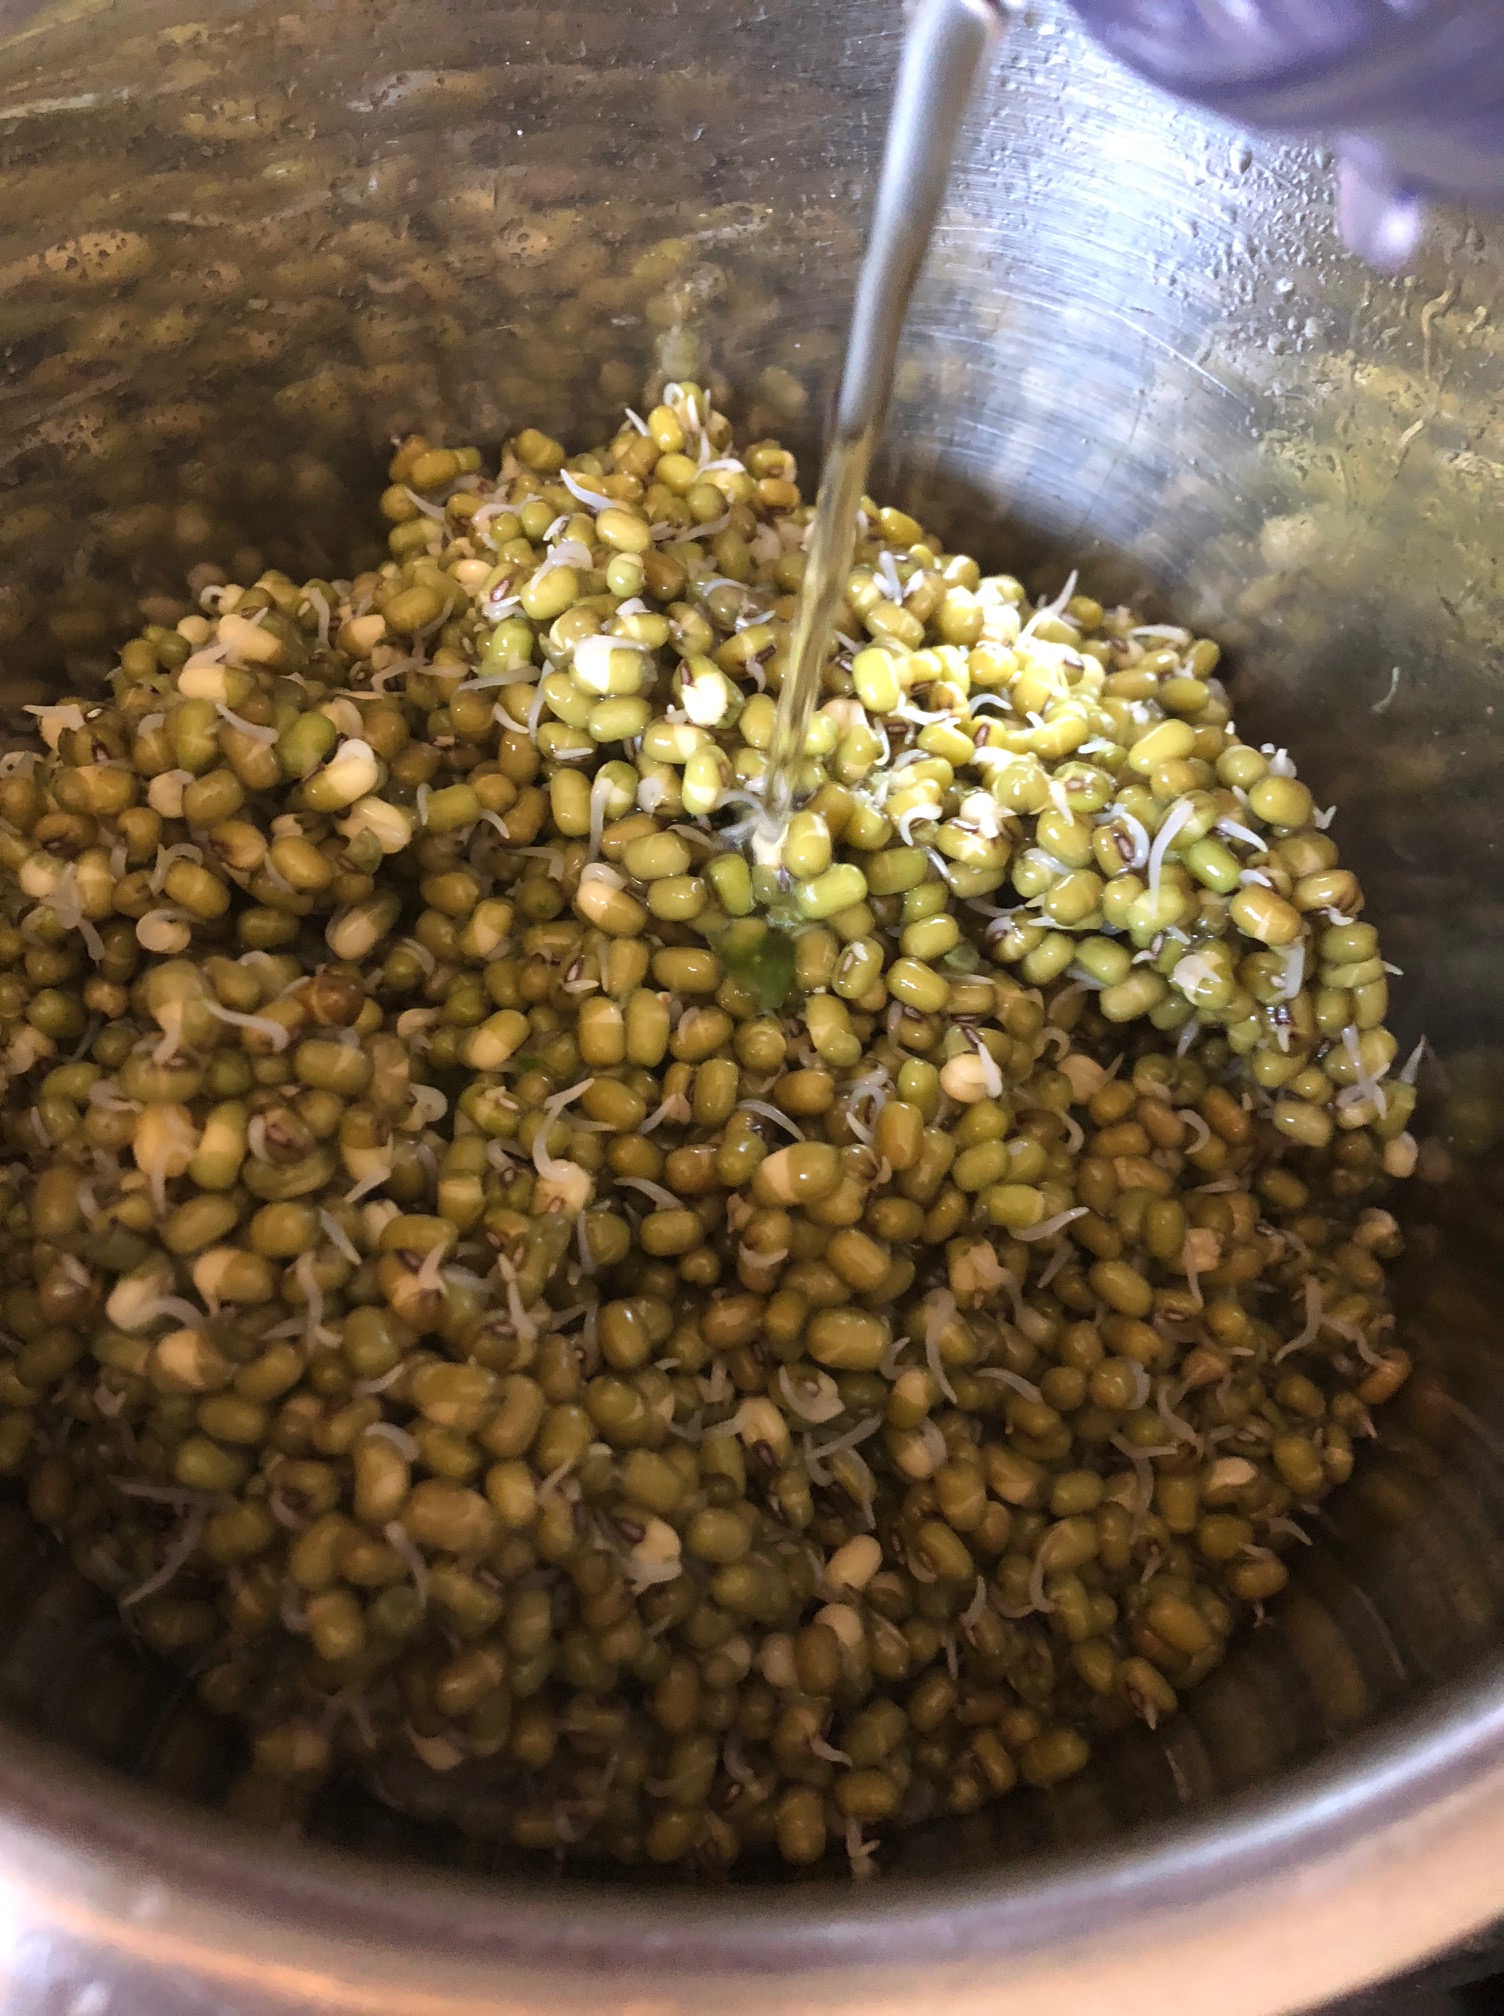 Adding water on top of sprouted beans